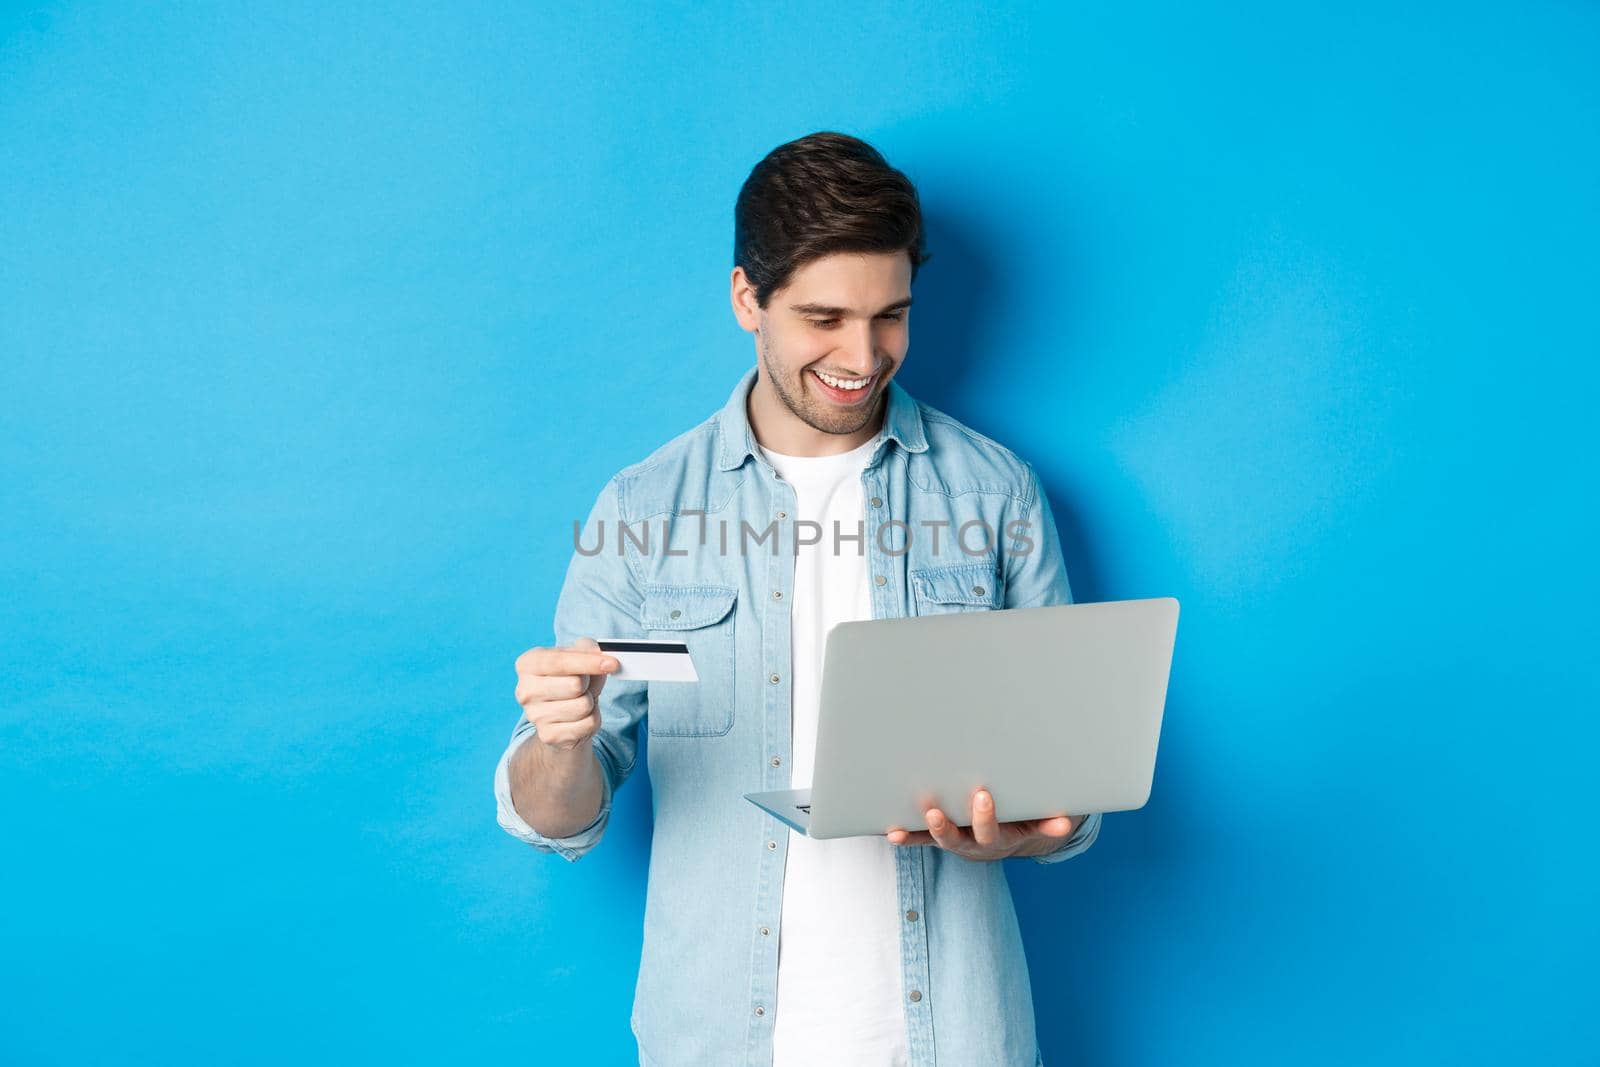 Young smiling man buying in internet, holding credit card and paying for purchase with laptop, standing over blue background.